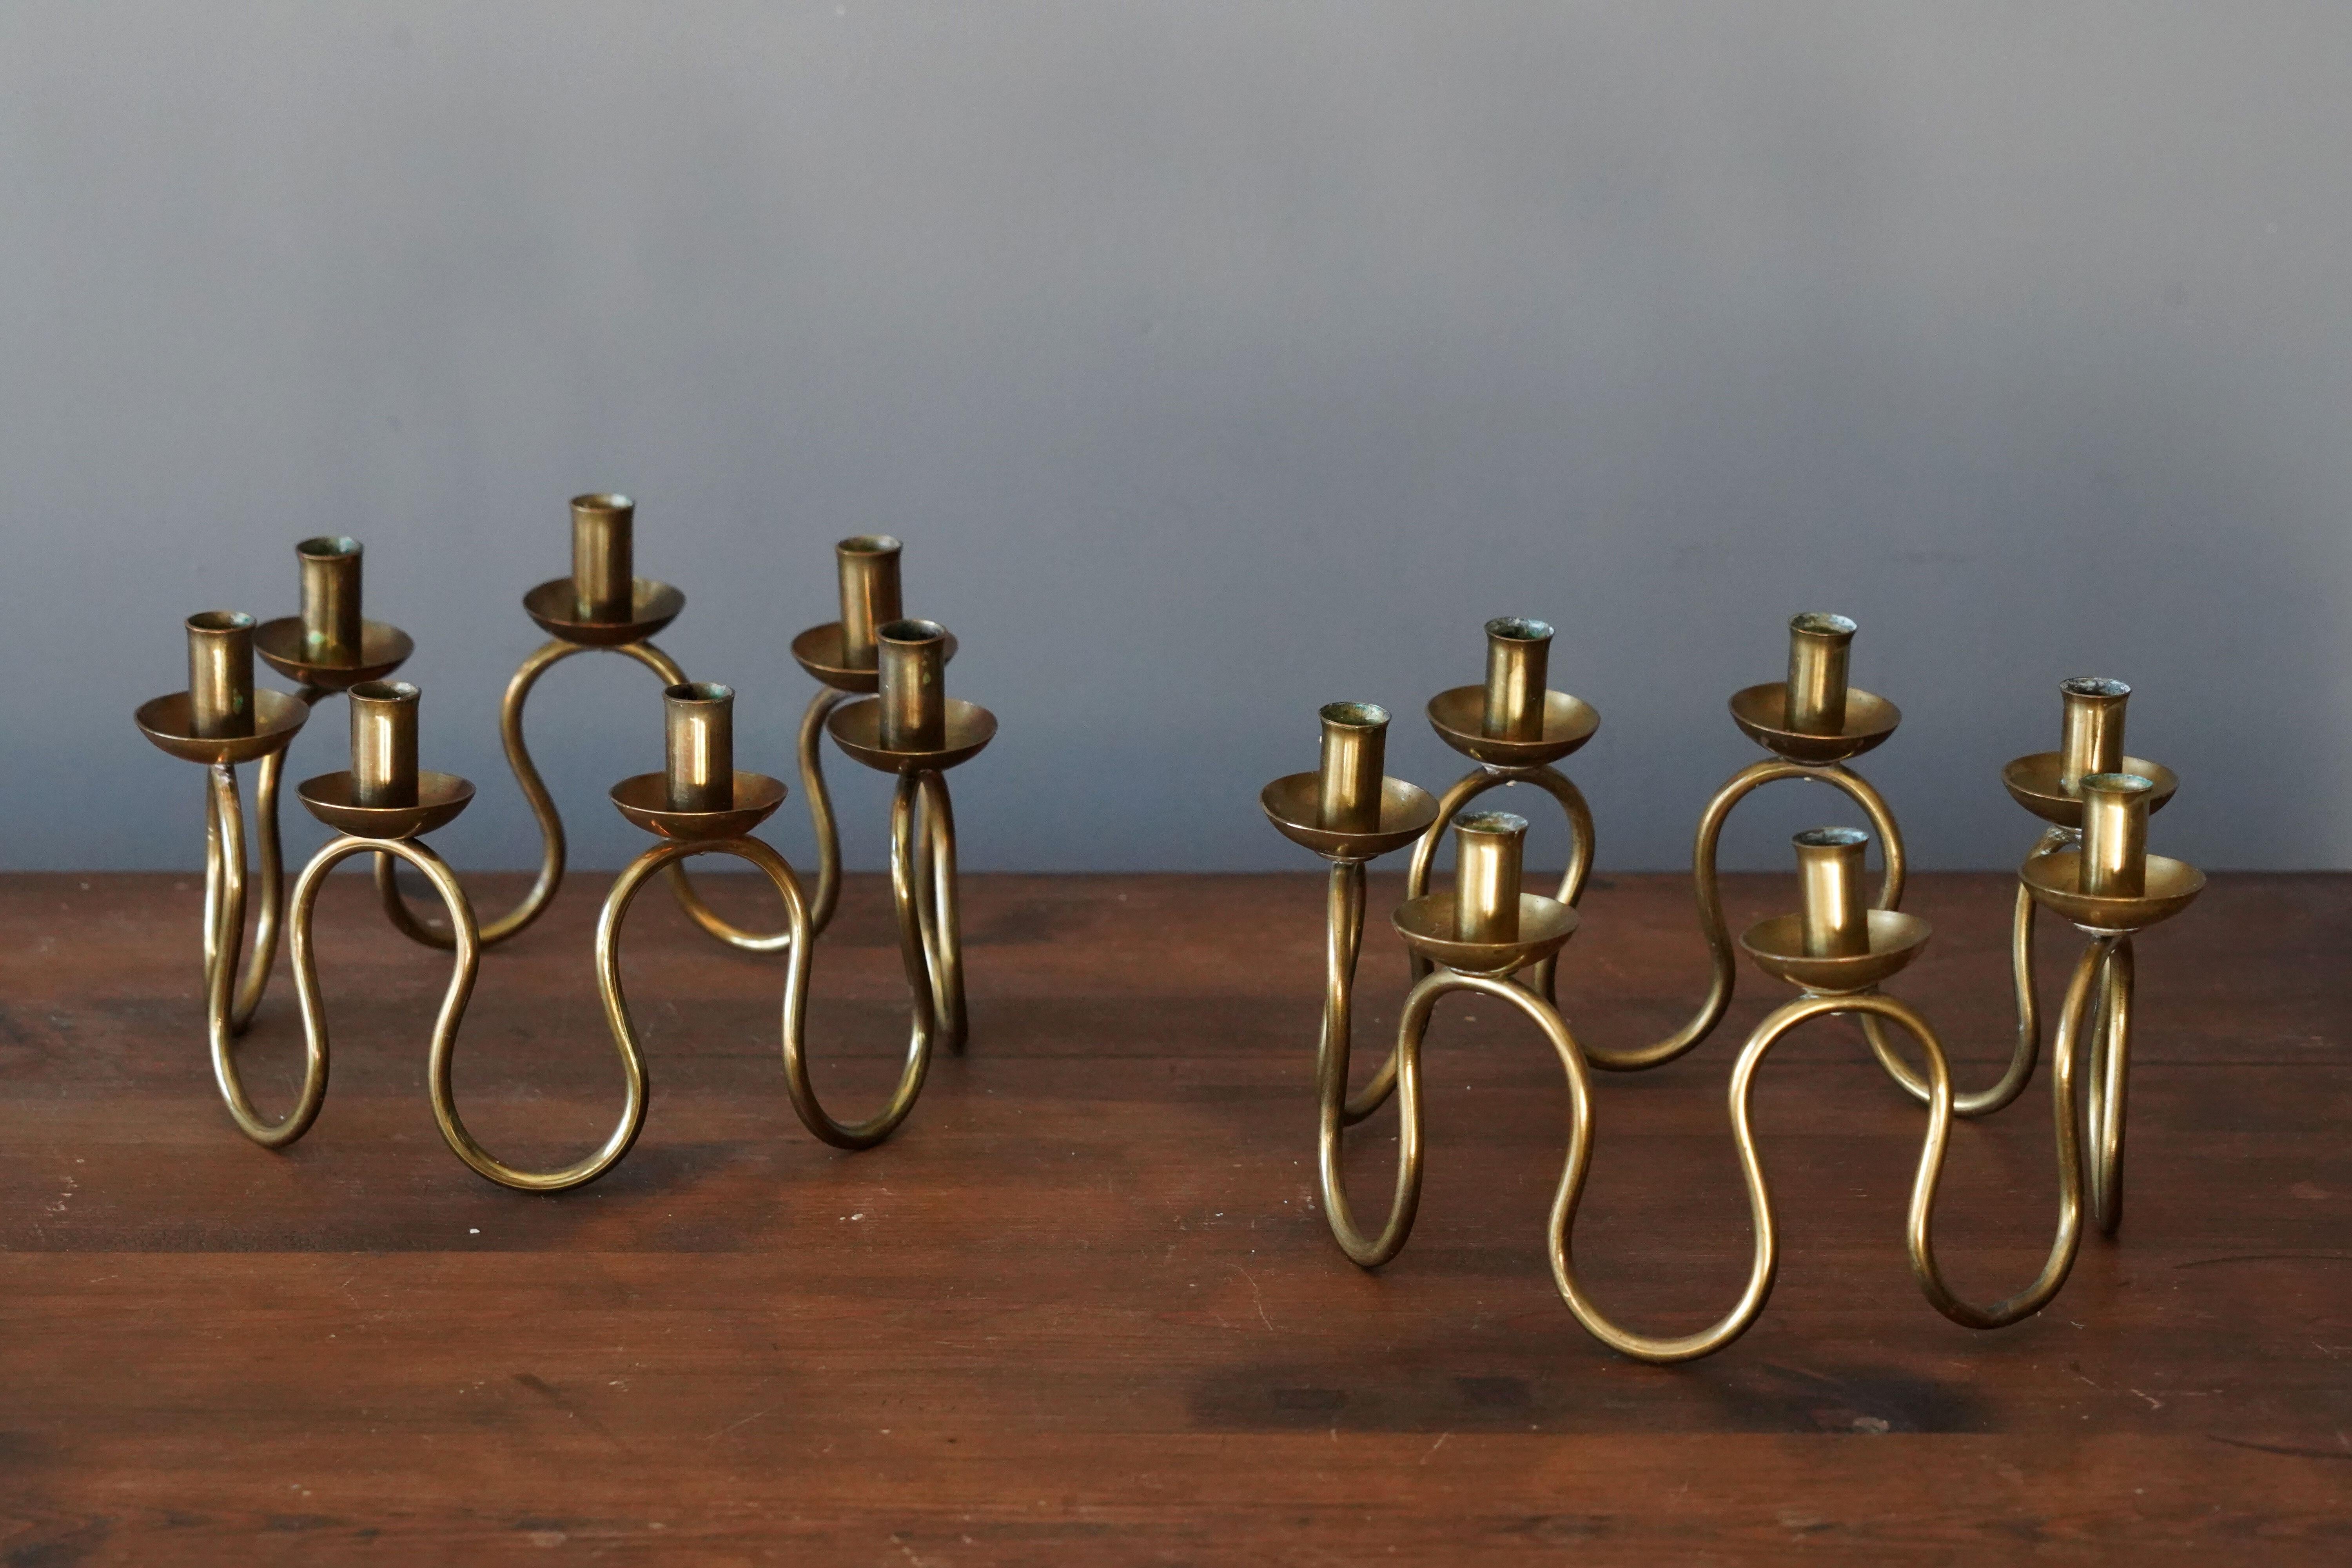 A pair of organic candelabras, designed by Lars Holmström for Svenskt Tenn, Sweden, 1950s. In brass.

Other designers of the period include Piet Hein, Paavo Tynell, Josef Frank, and Jean Royere.

 